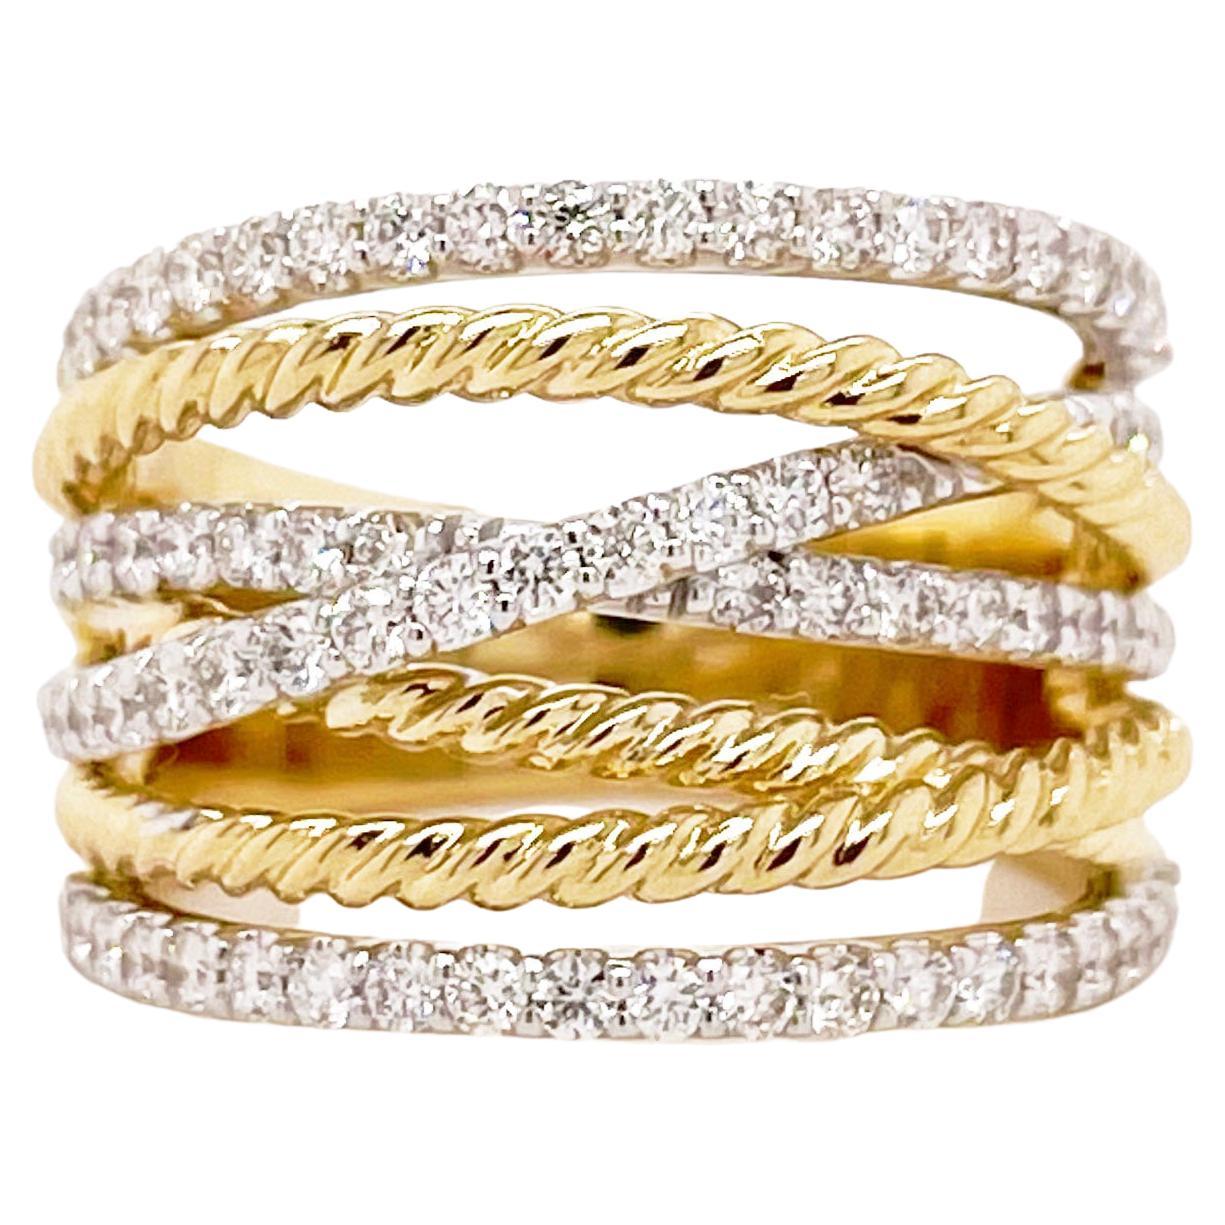 For Sale:  Twisted Rope Ring w Diamond Multi Row Band in 14K Mixed Metal 76 Diamonds